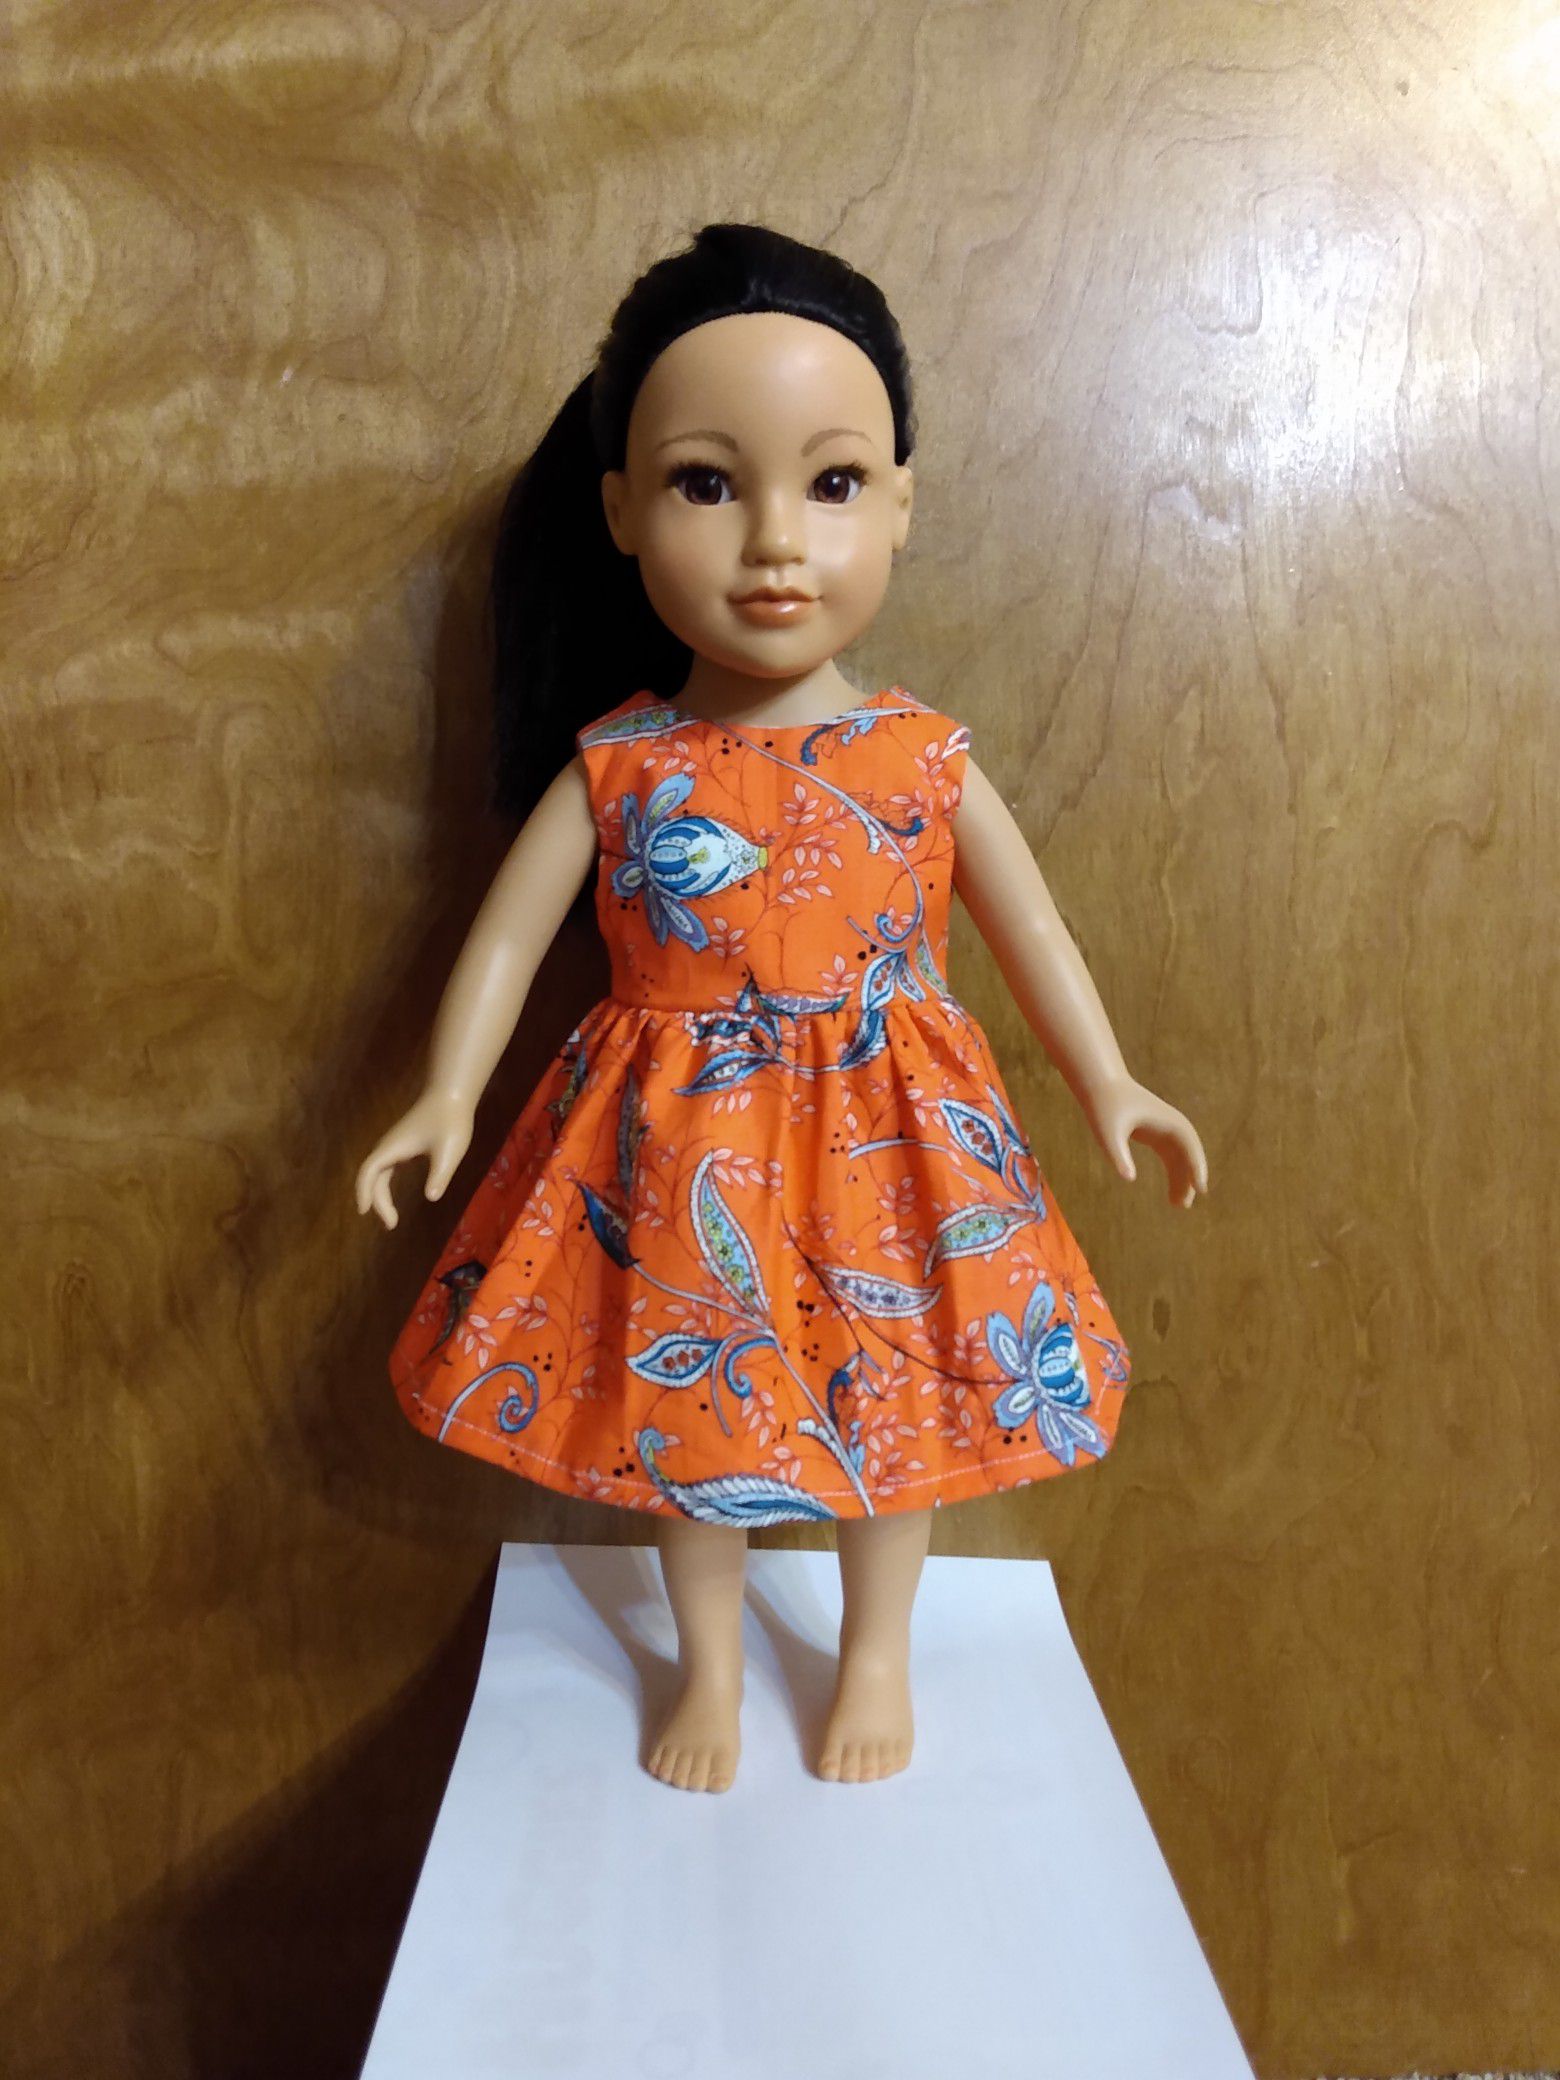 American Girl Or 18"inches or AG doll dress made to fit 18 inches dolls perfect for gift or for your child favorite doll